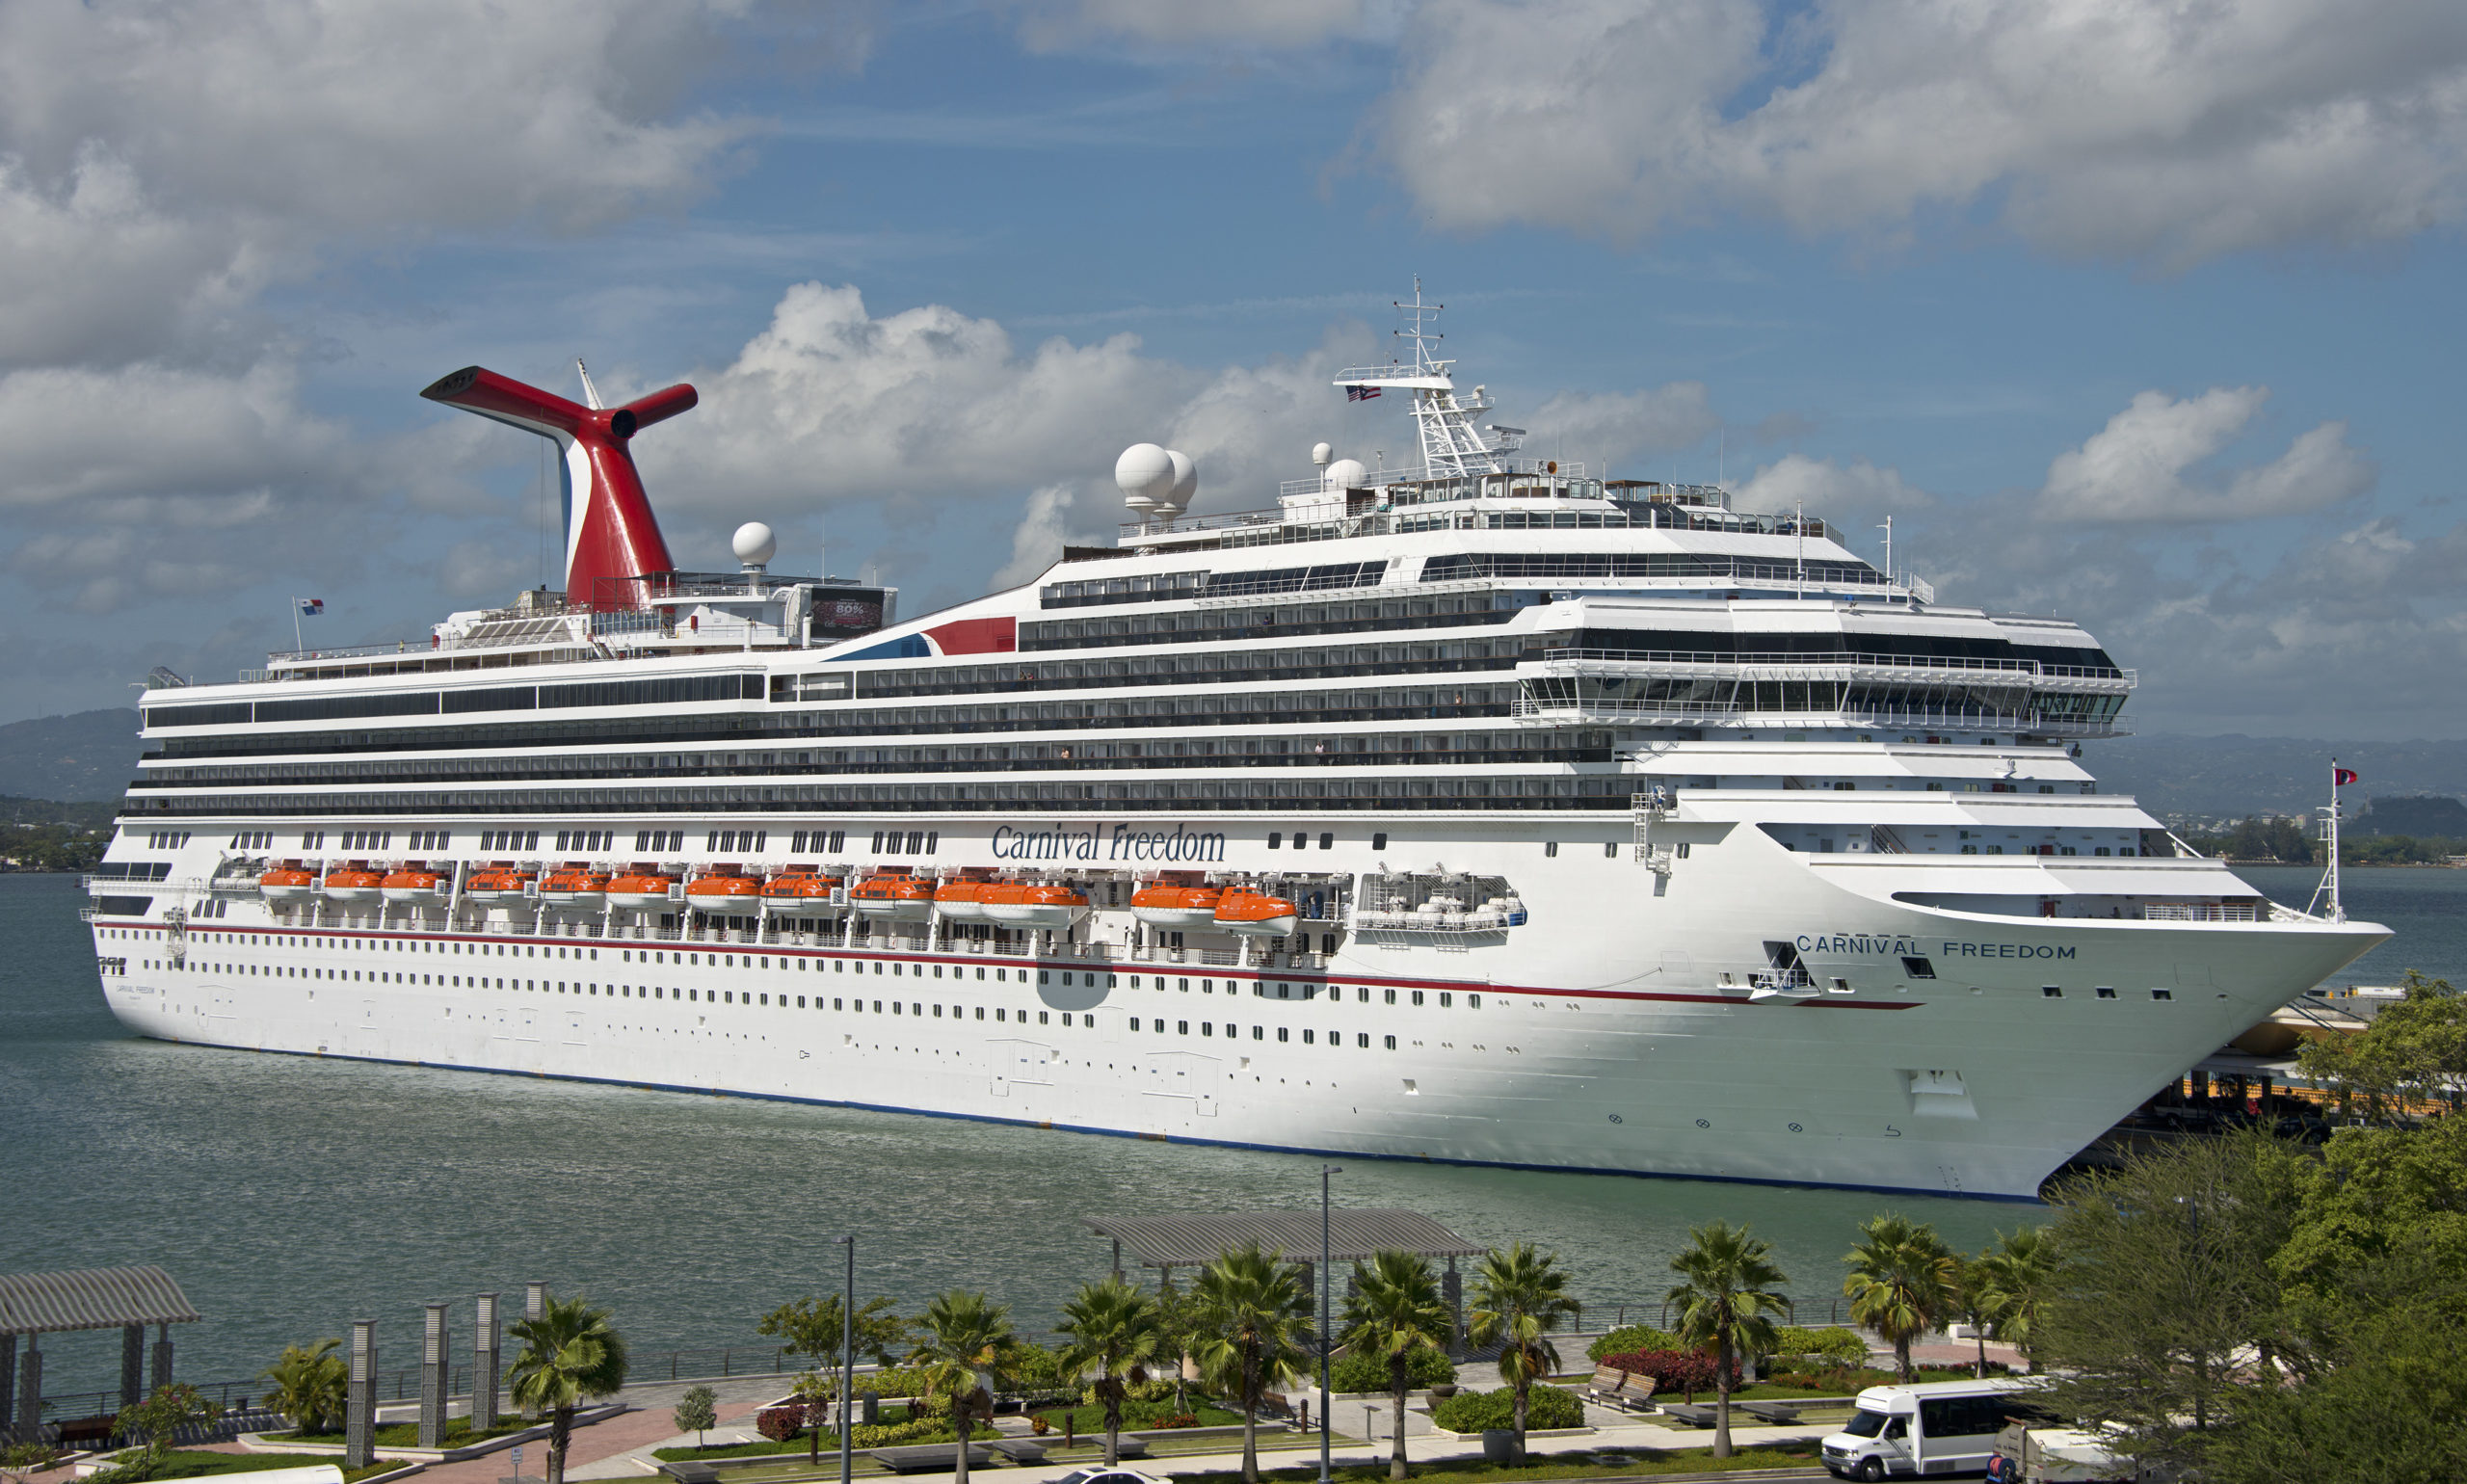 katy-s-gone-cruising-carnival-freedom-offers-the-latest-in-family-fun